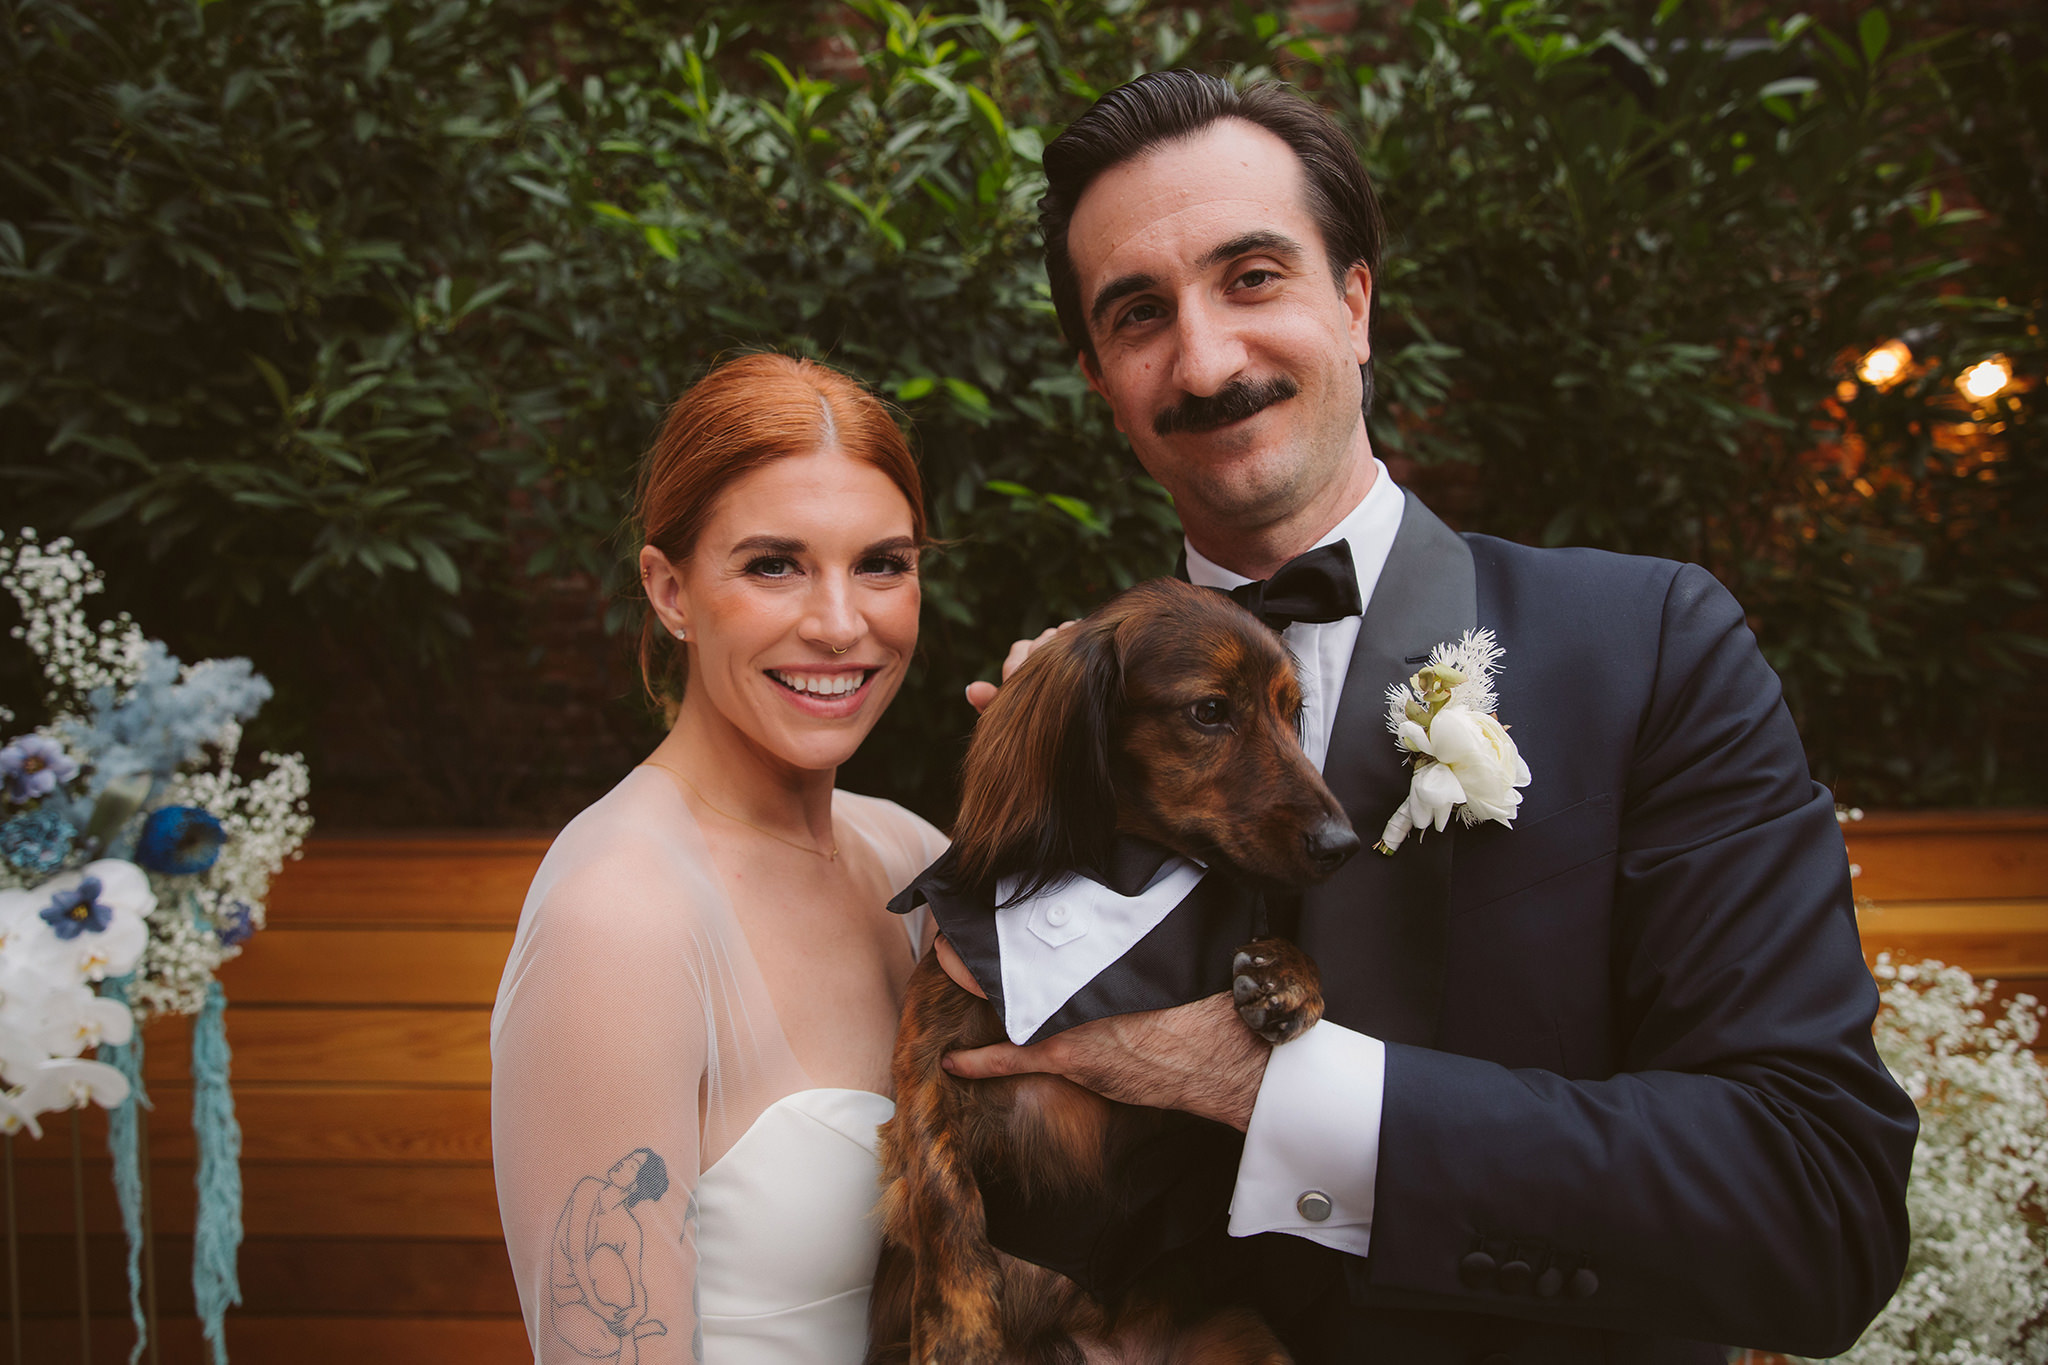 Family portrait during a wedding at the Wythe Hotel in Brooklyn, New York